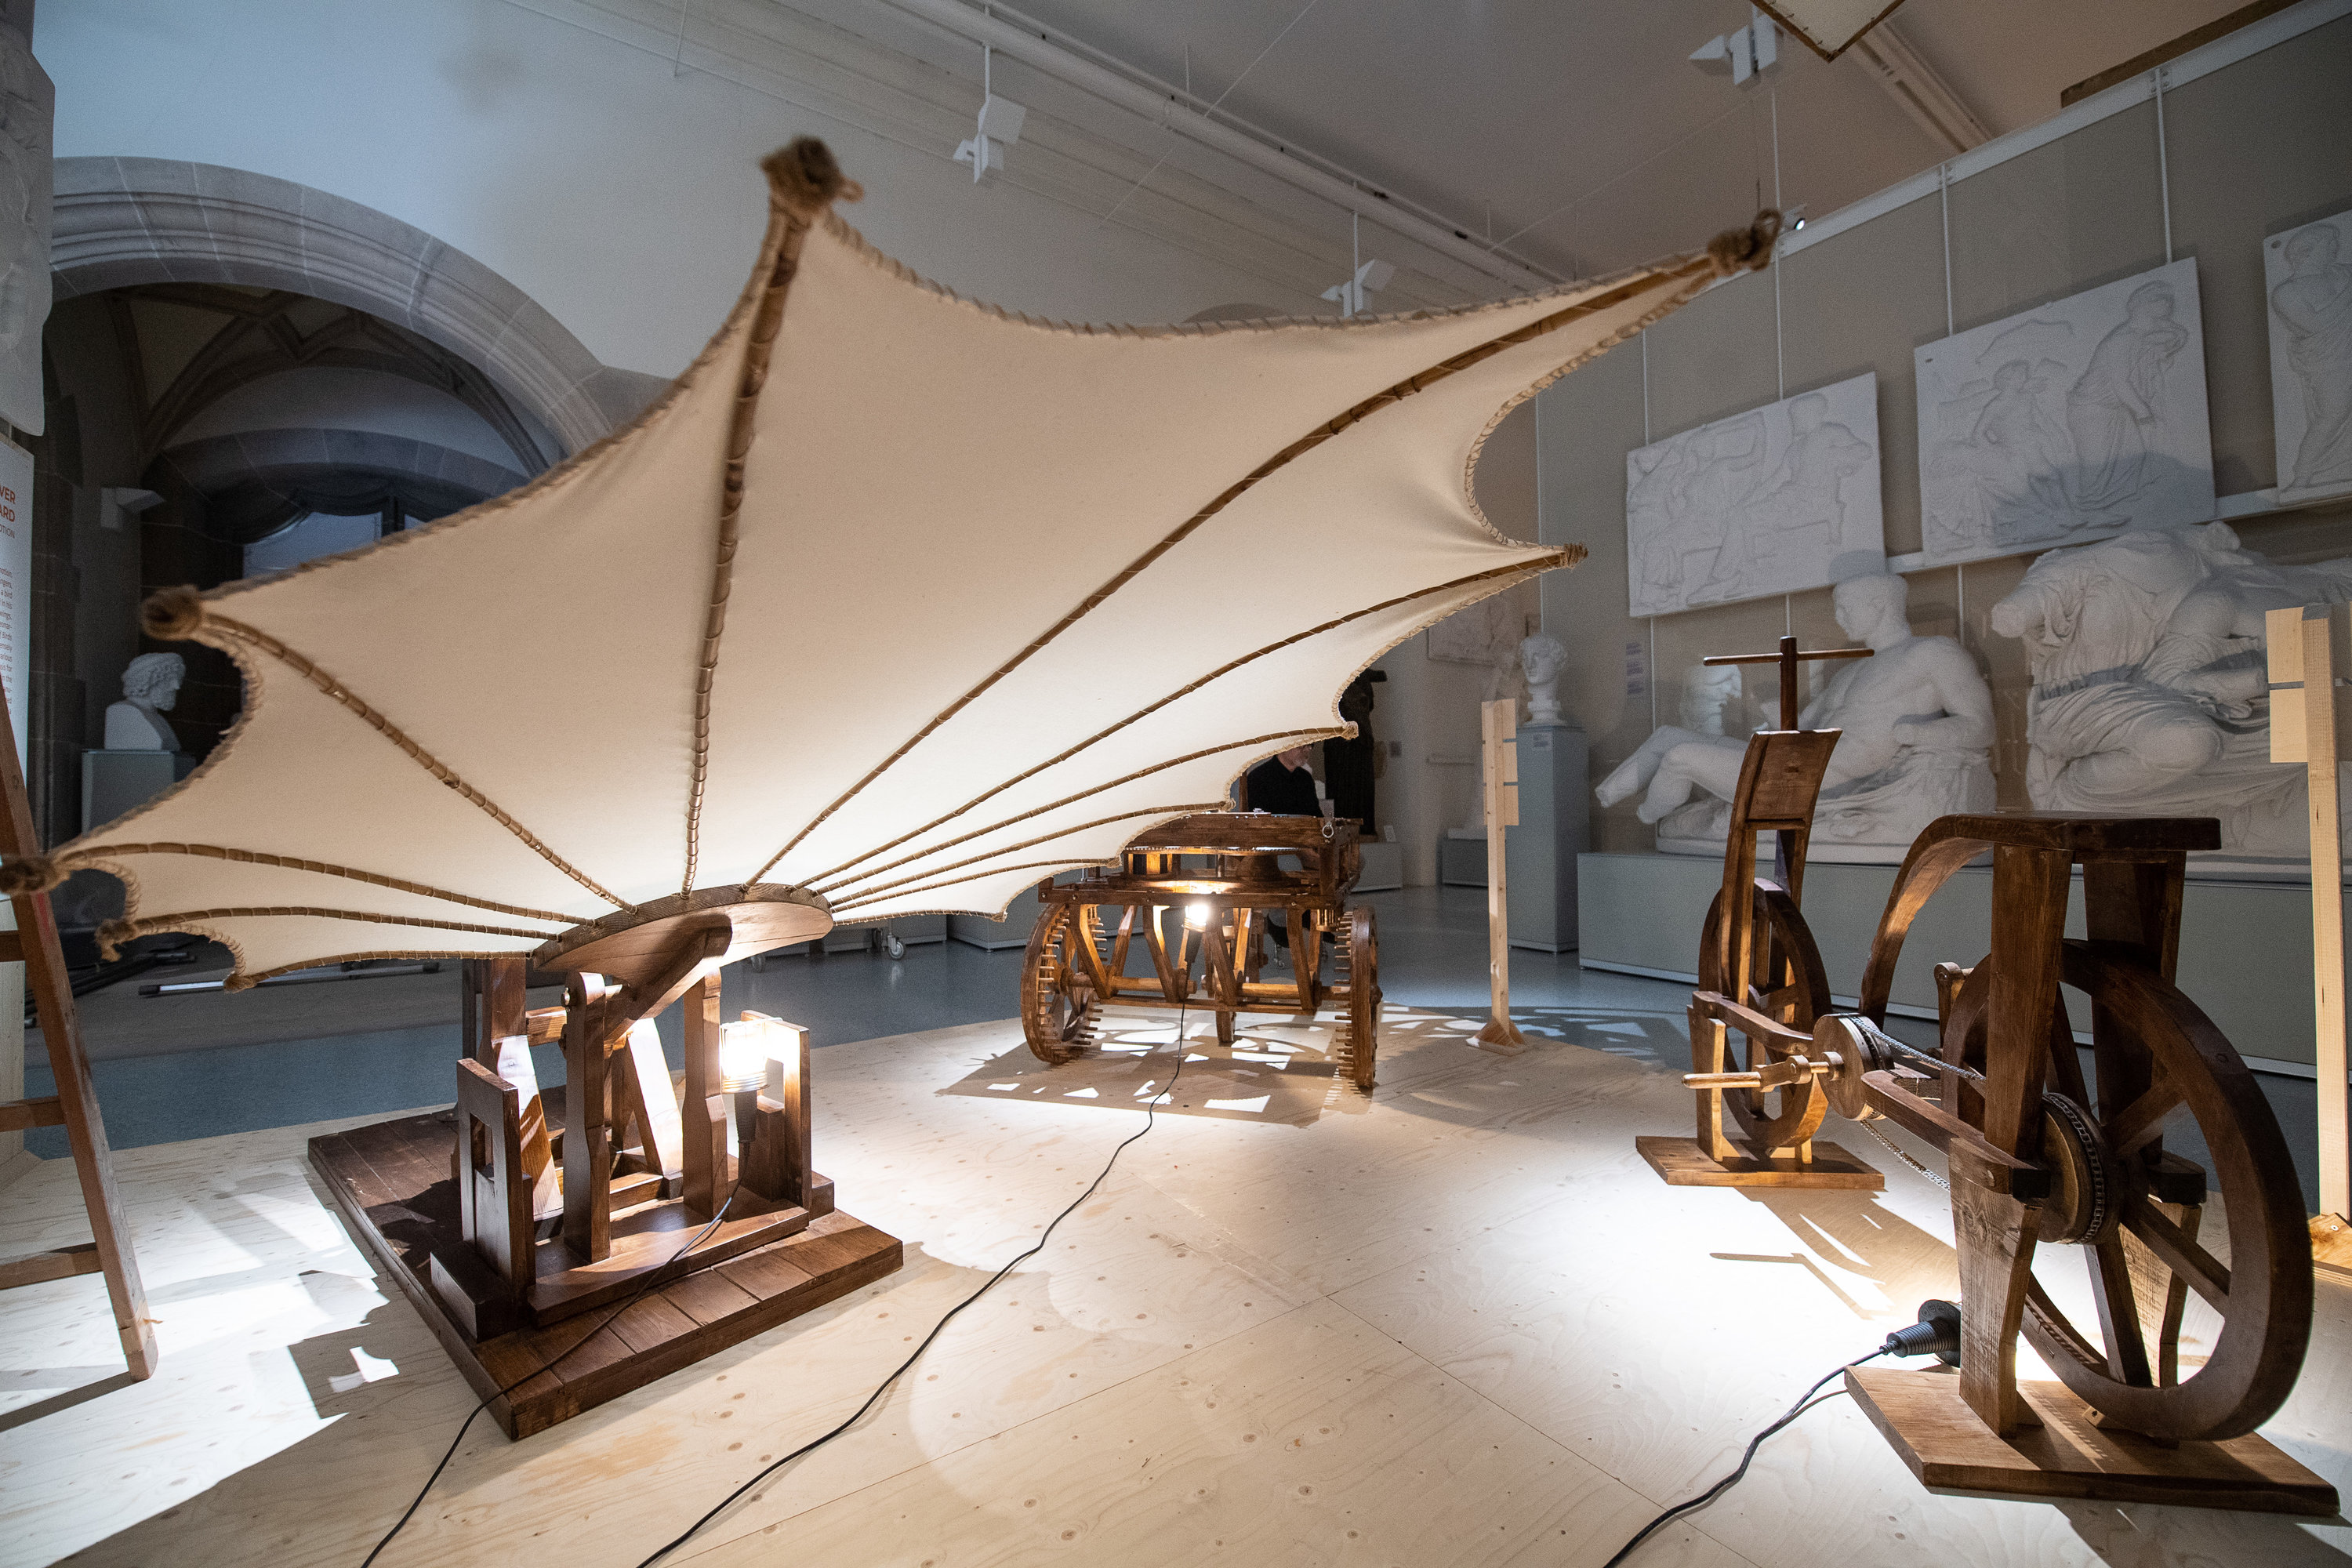 29 April 2019, Baden-Wuerttemberg, Tuebingen: Replicas of da Vinci's machines are seen on display during a press tour of the exhibition "Ex Machina - Leonardo da Vinci's Machines between Science and Art" at the Museum of the University of Tuebingen. The exhibition, which runs from 03 May to 01 December 2019, features replicas of sketches by da Vinci. Photo: Sebastian Gollnow/dpa